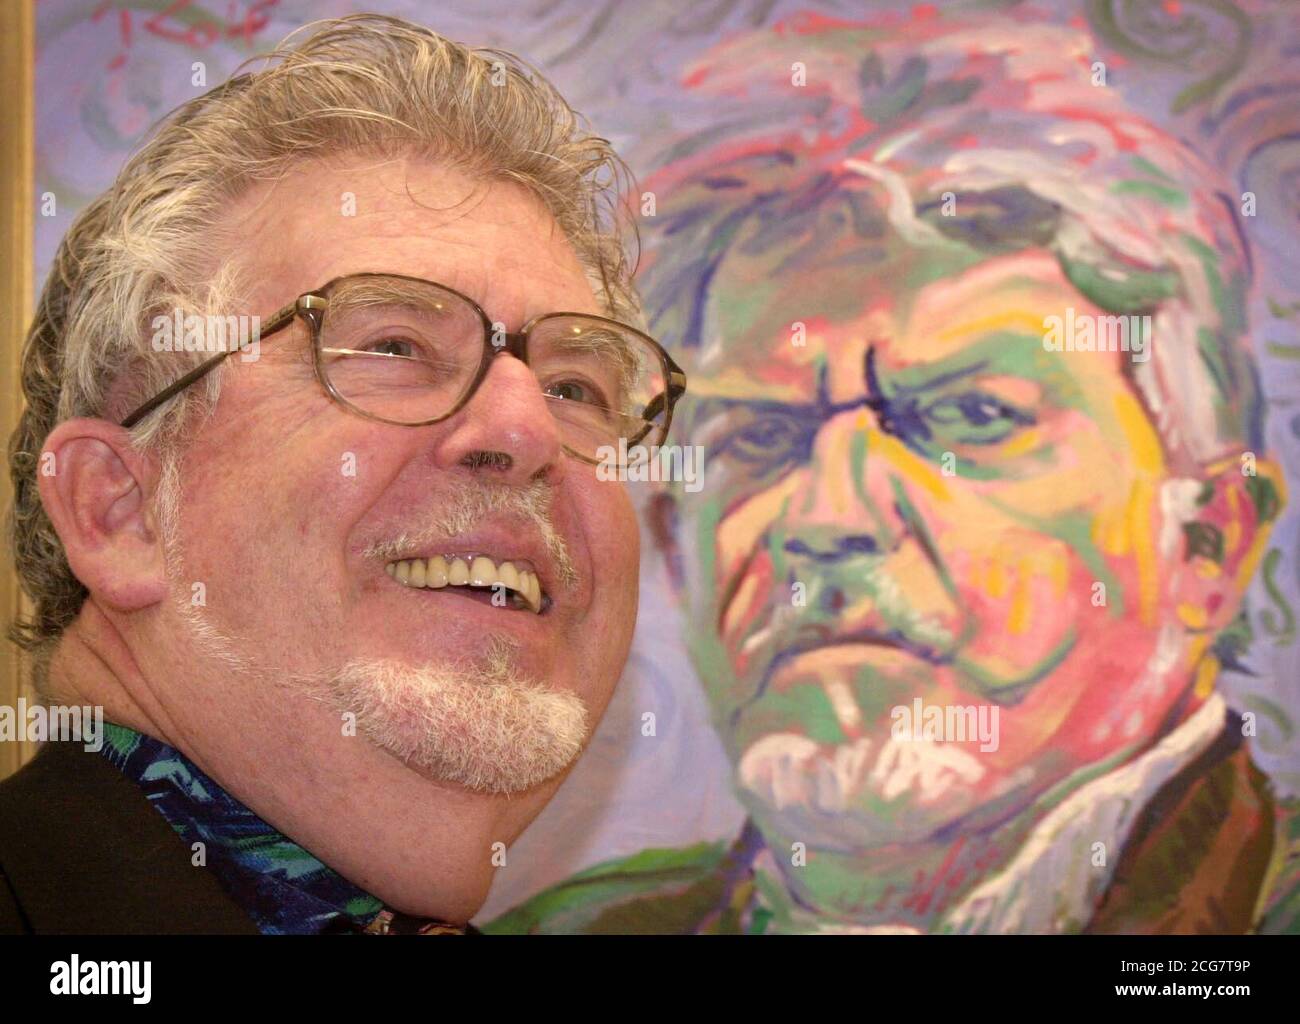 Artist Rolf Harris stands in front of his self-portrait painting at the National Gallery, London. Rolf will have some of his works based on well-loved masterpieces such as Monet's Waterlilies and Van Gogh's Sunflowers go on show at the London gallery until December 2nd. Stock Photo